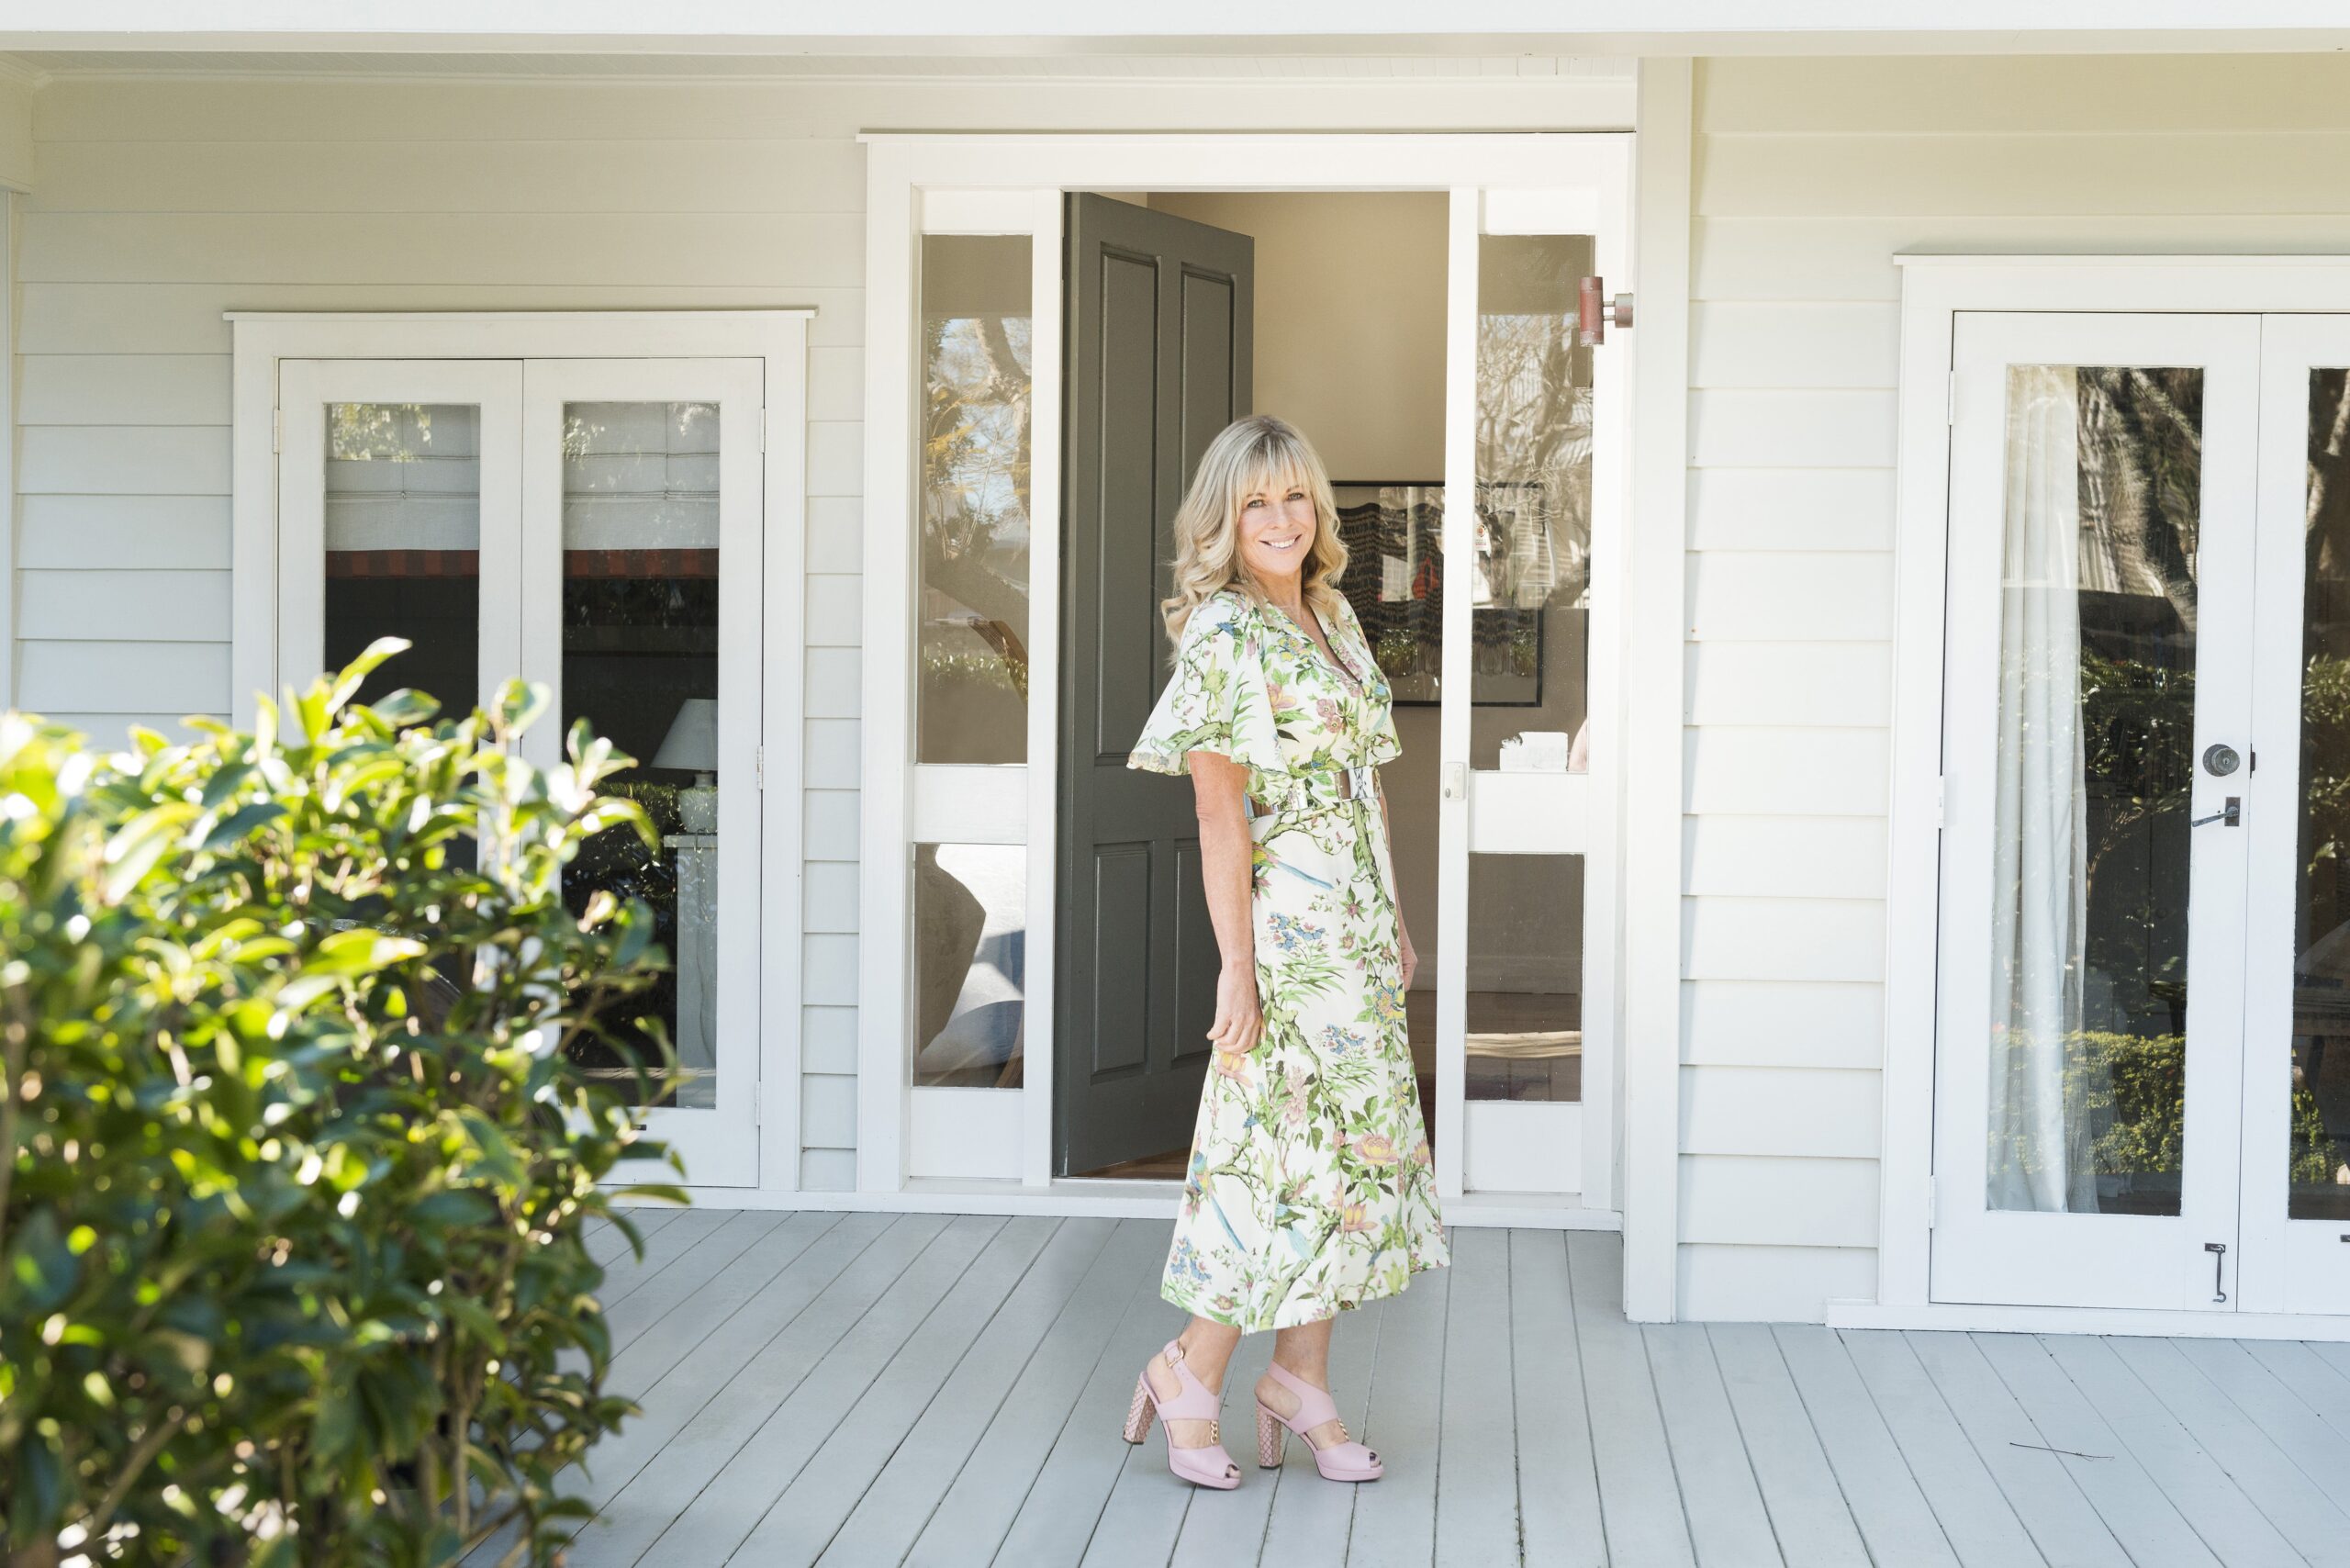 Annabel Langbein’s passion for sustainable living